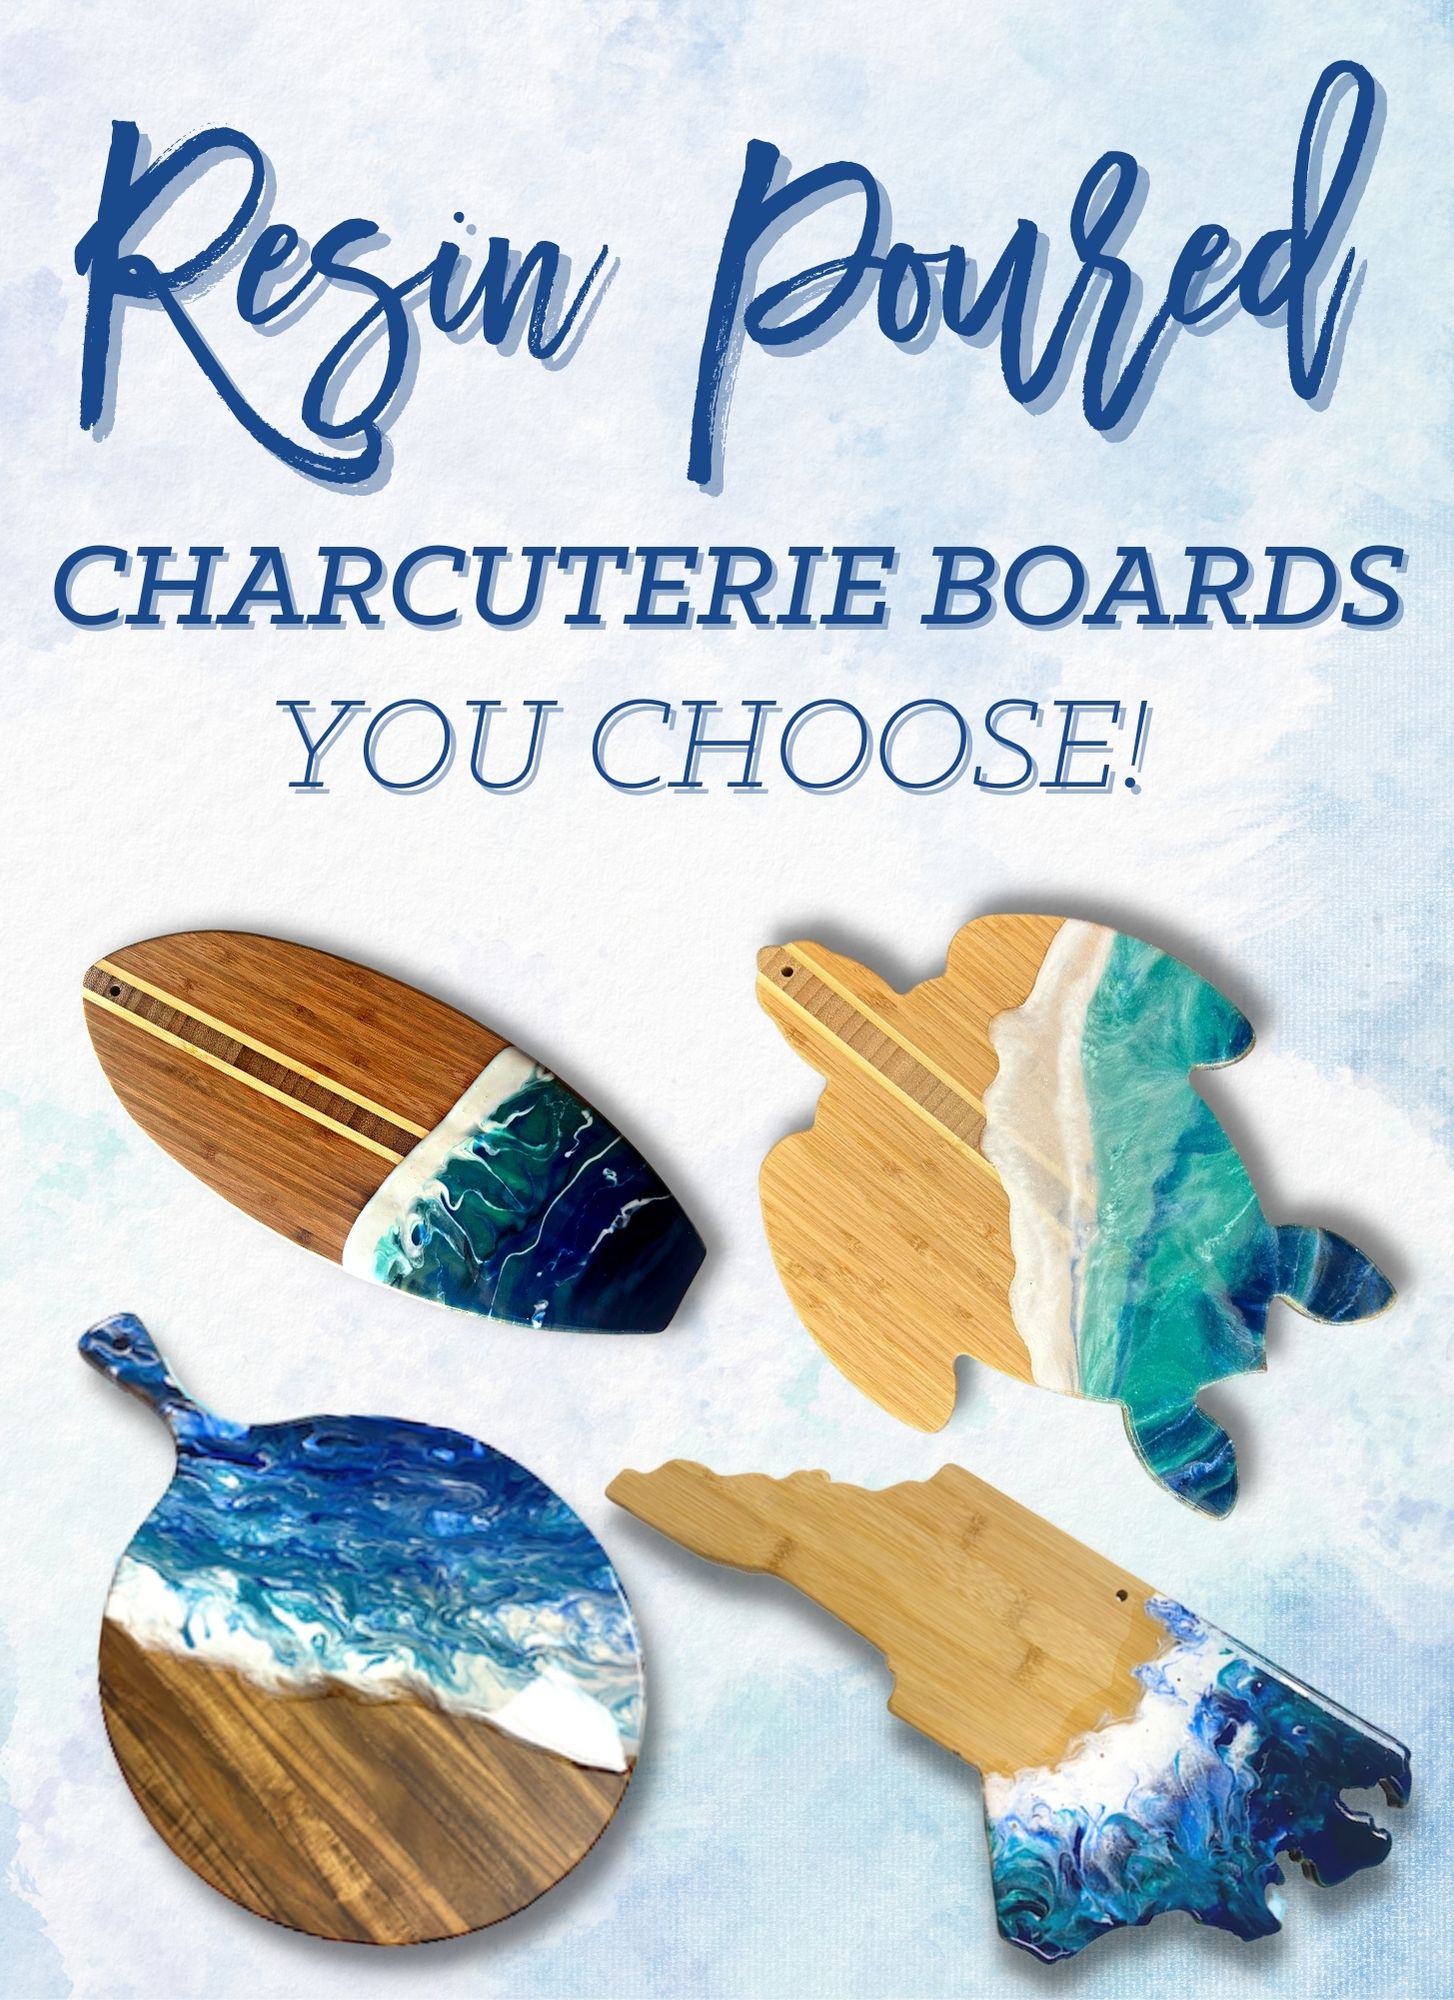 YOU CHOOSE! Resin Board Workshop *CHOOSE ANY COLORS! 6:30pm *MUST REGISTER BY APRIL 18TH!